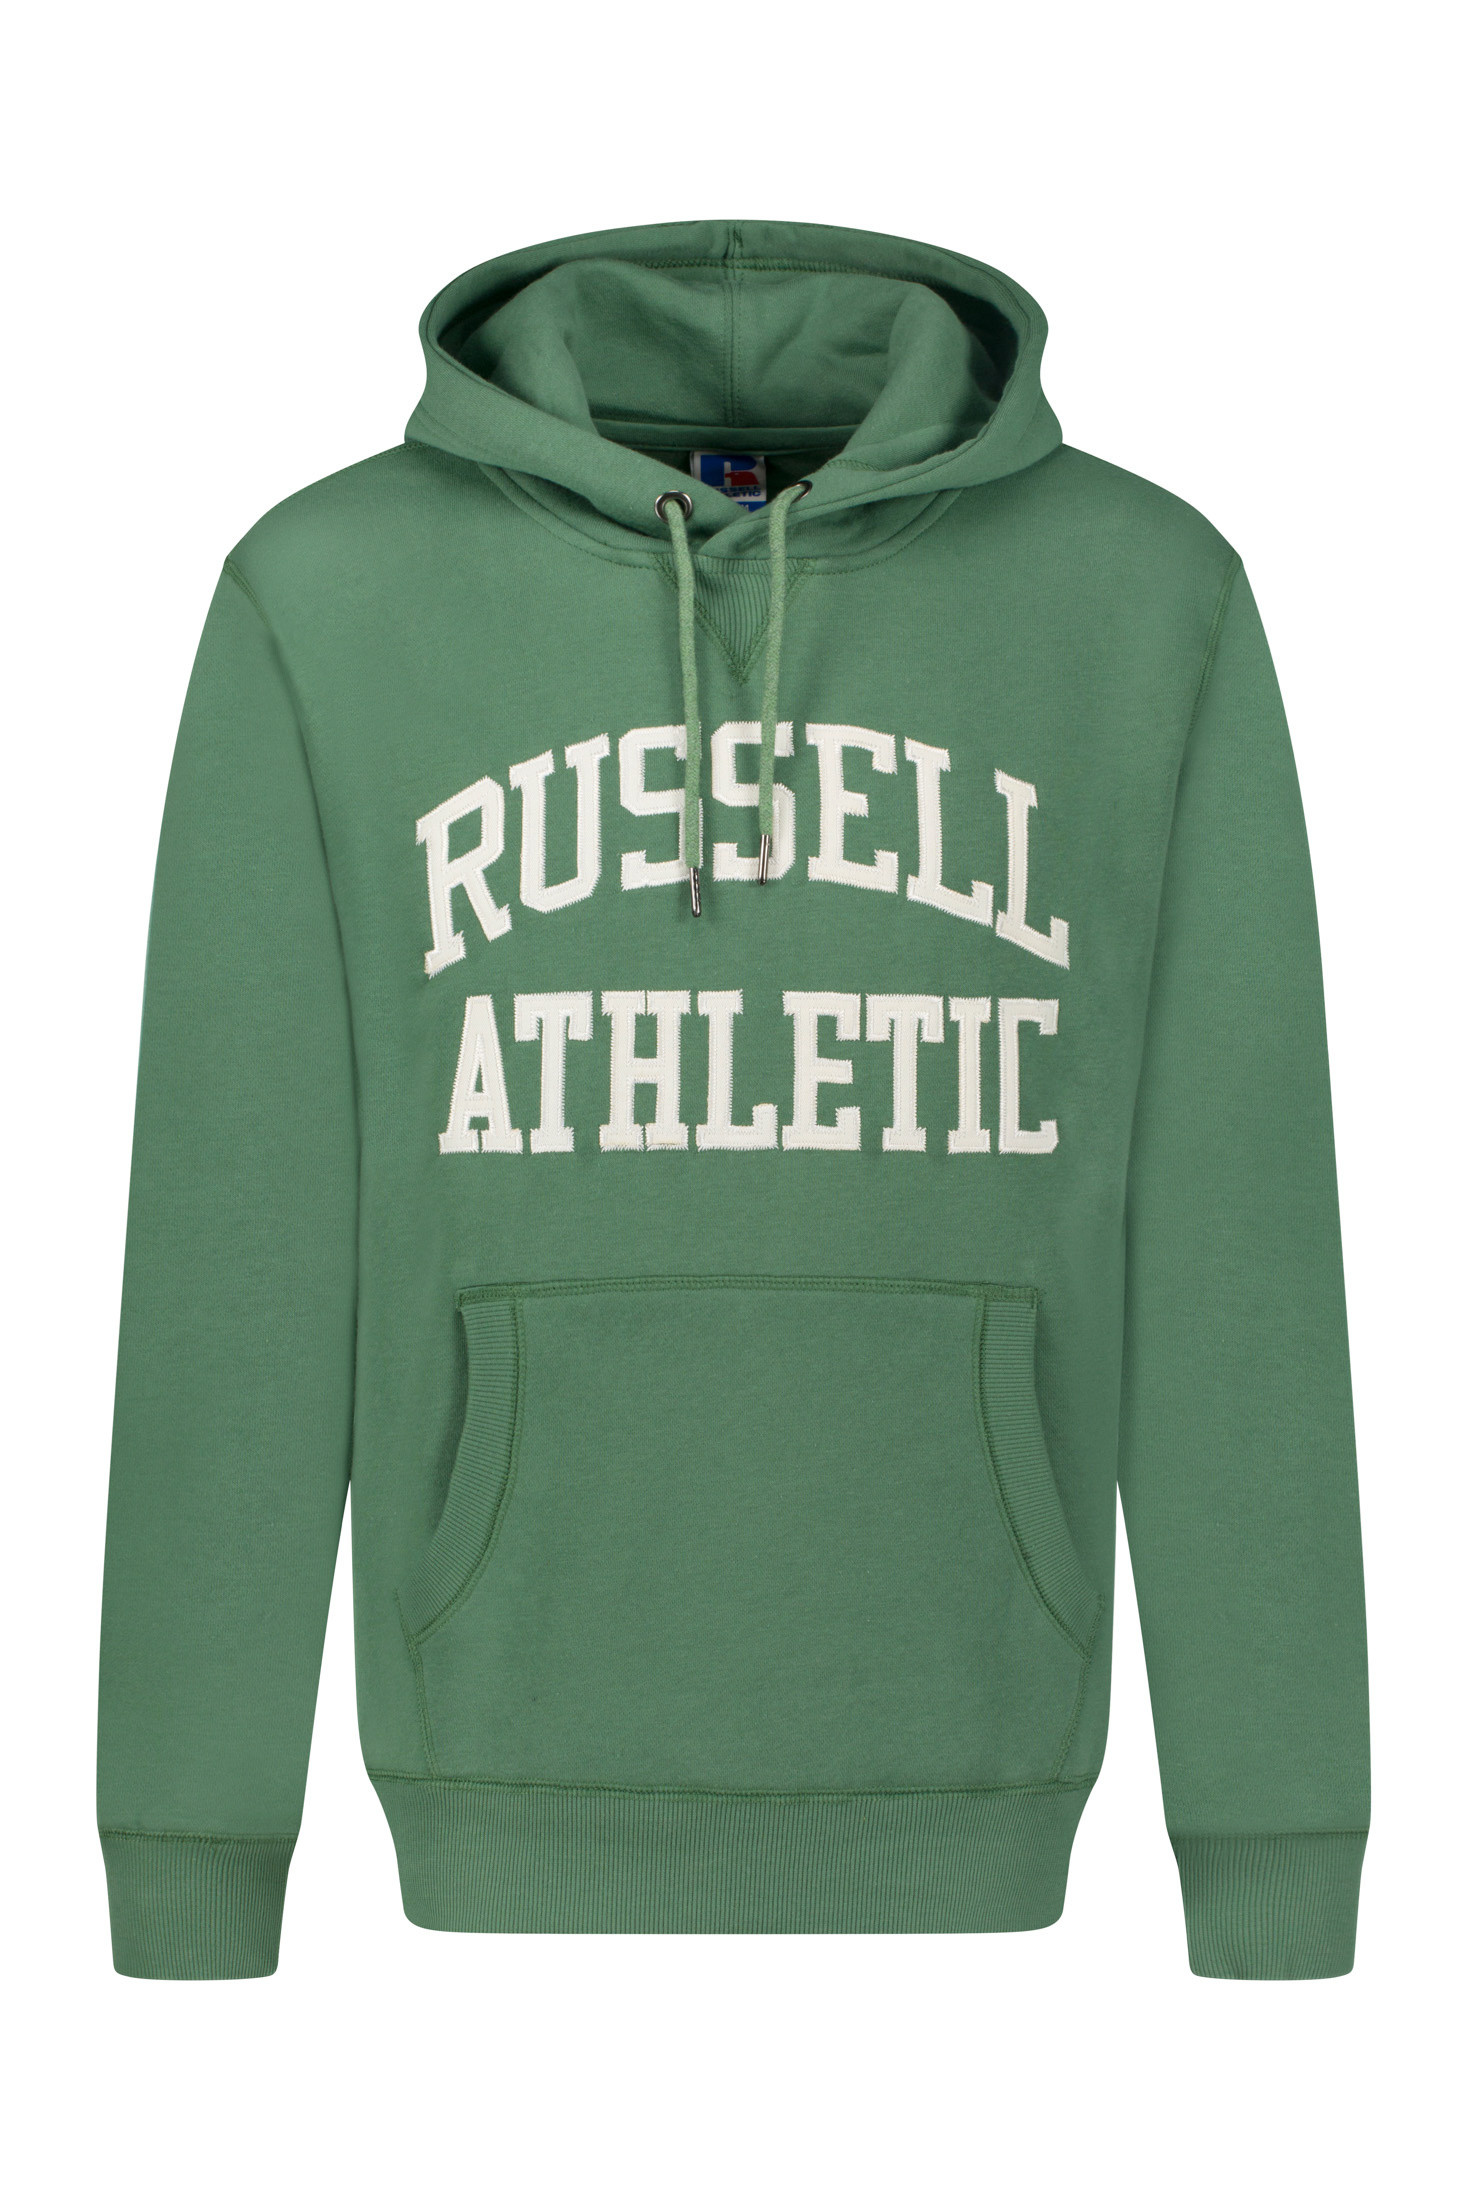 Russell Athletic - Hoodie, Light Green, large image number 0